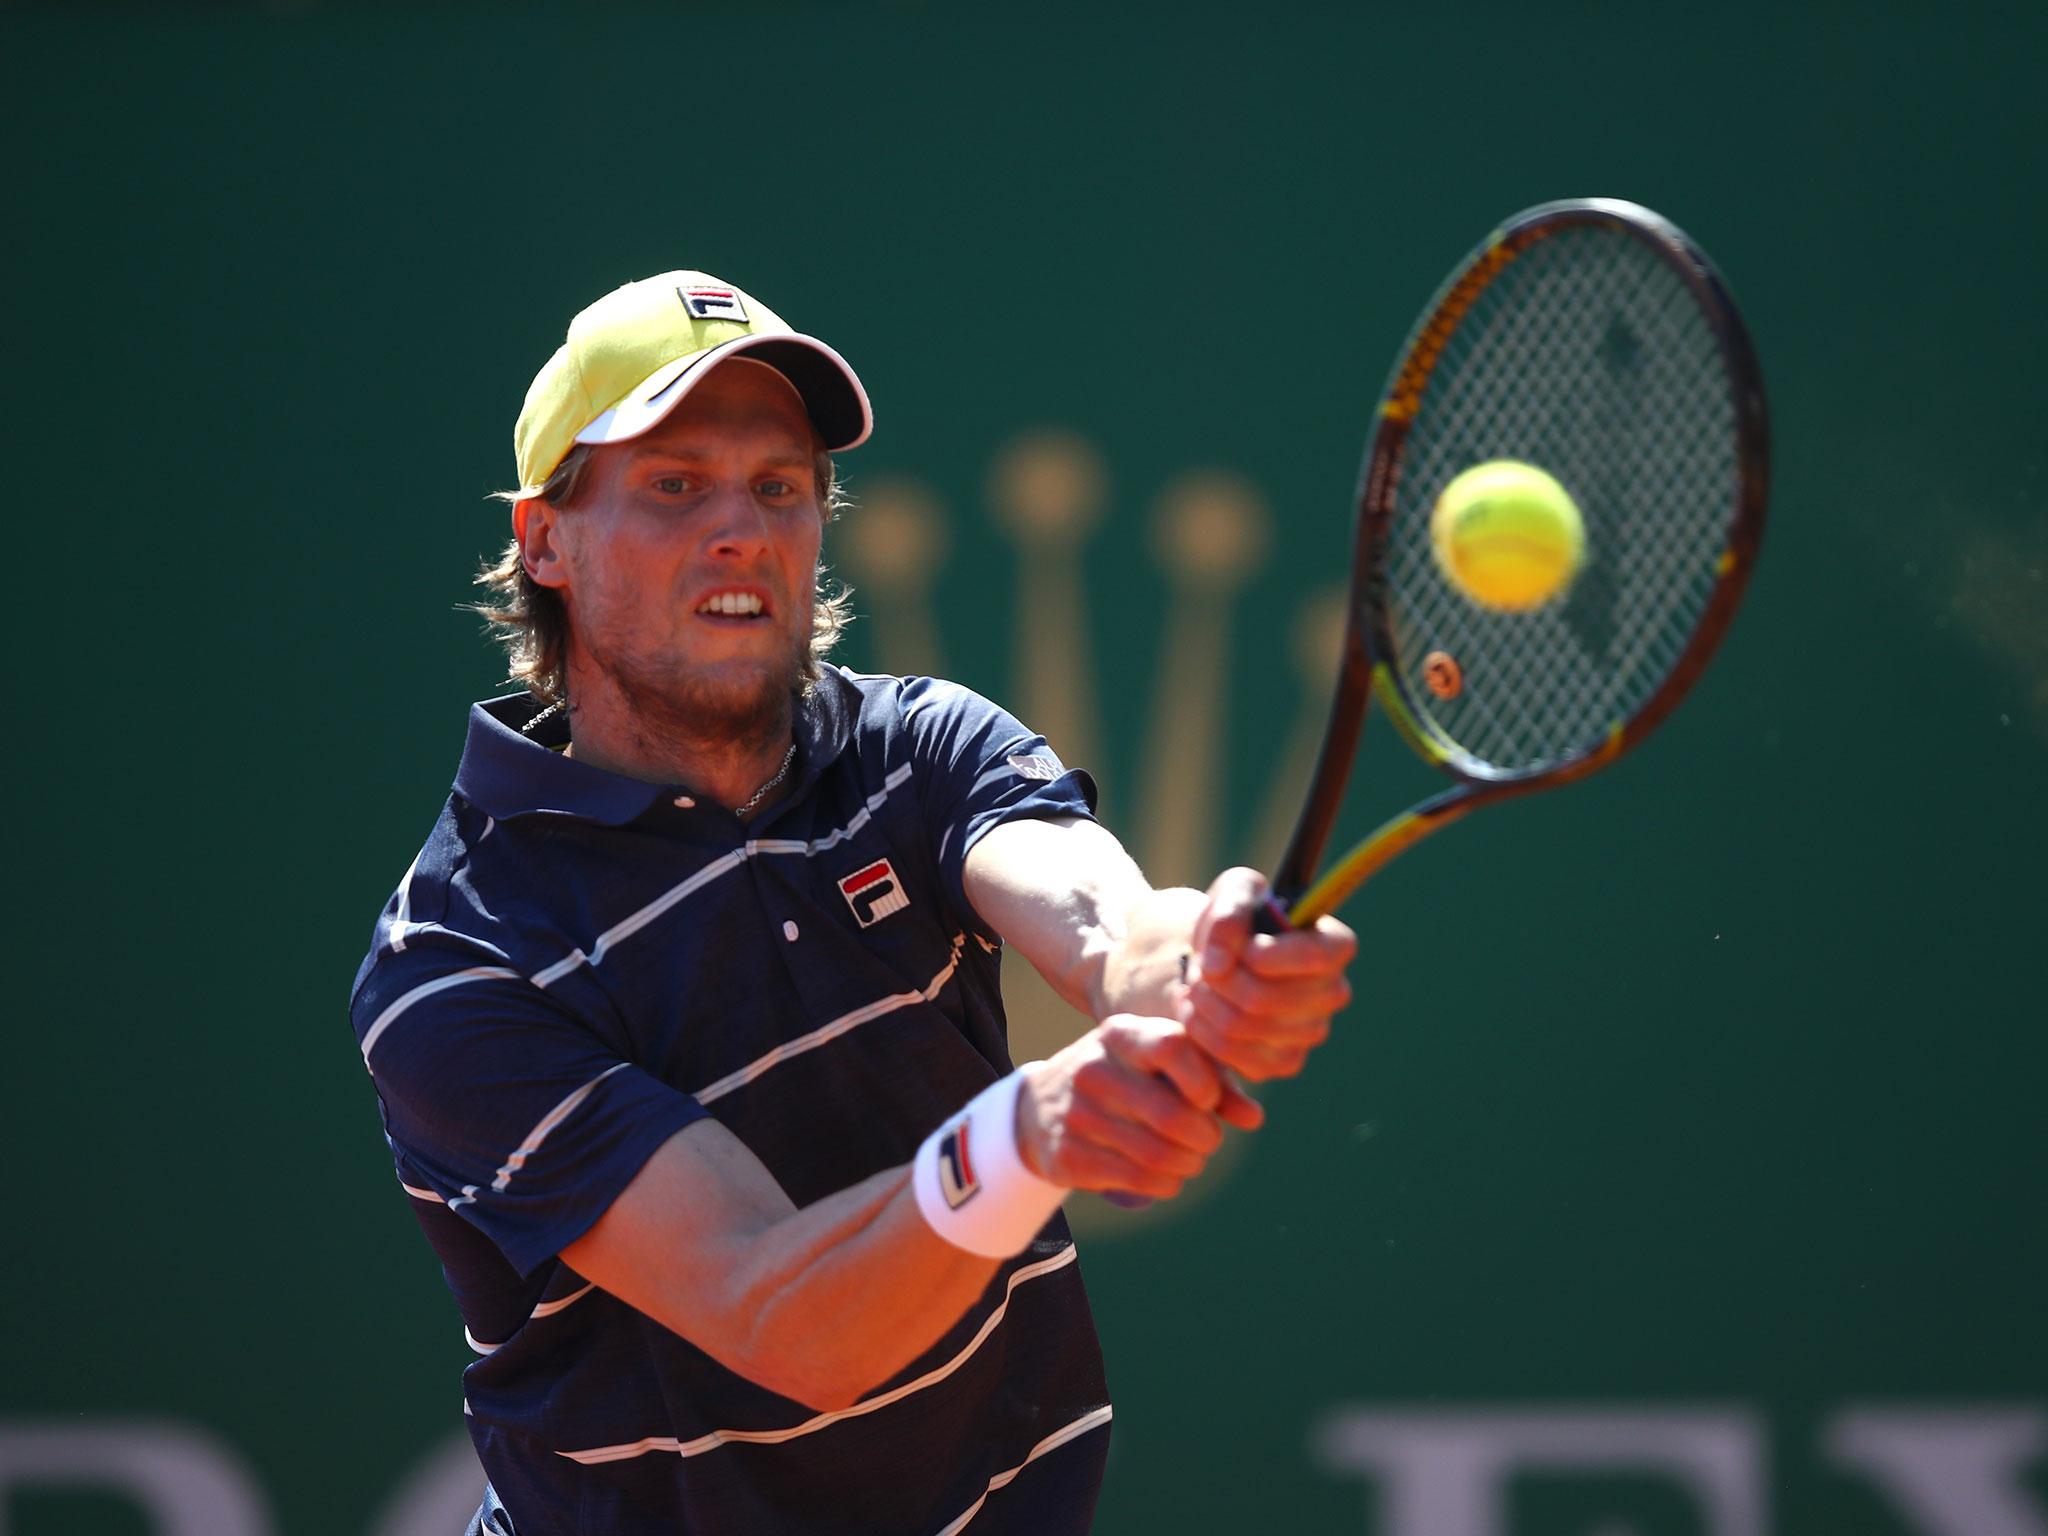 The task of beating Seppi, a solid and experienced campaigner, proved beyond Edmund